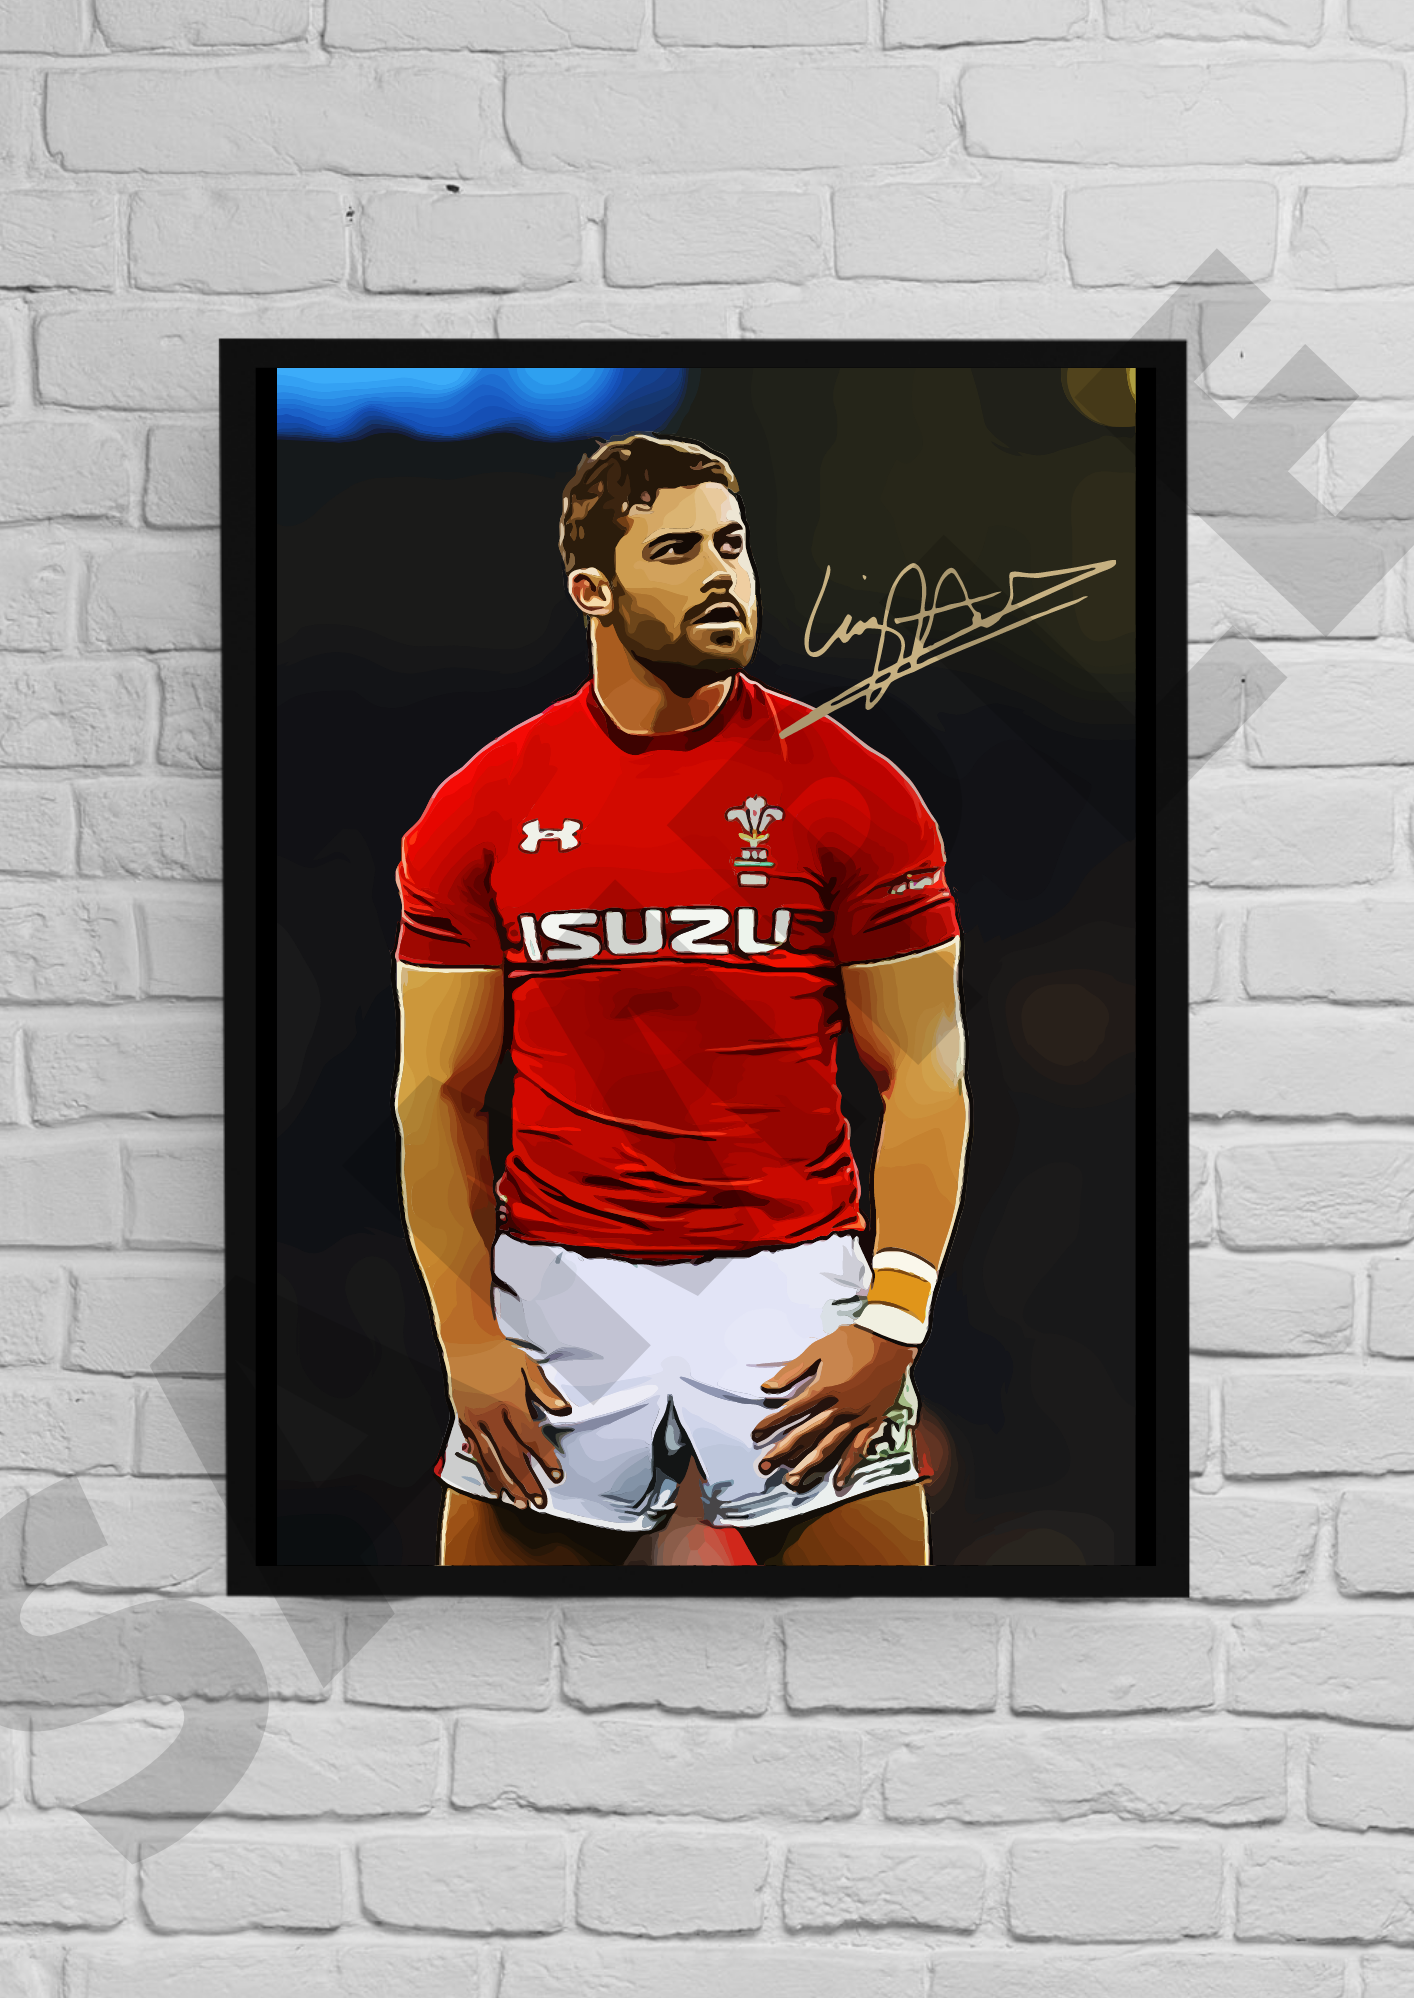 Leigh Halfpenny Wales (Rugby) collectible/memorabilia/print #61 - Signed